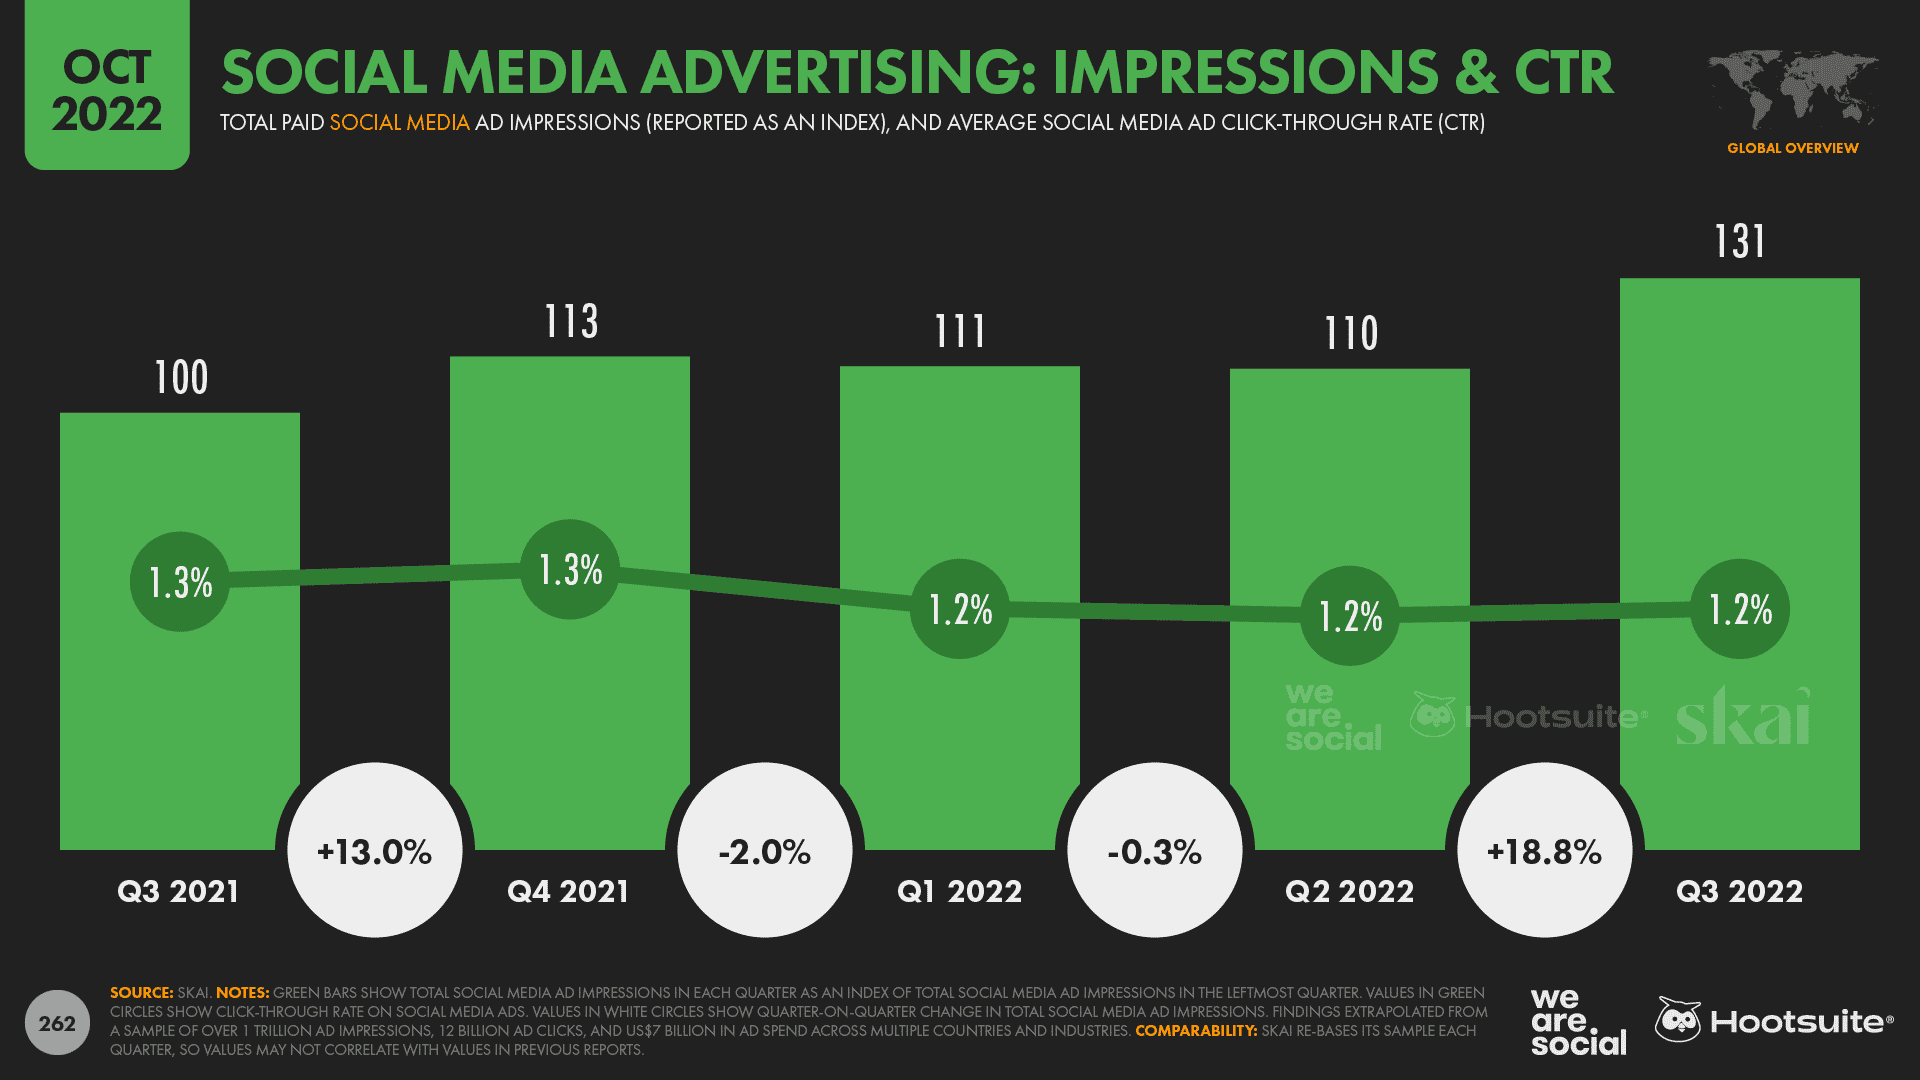 Chart showing social media advertising impressions